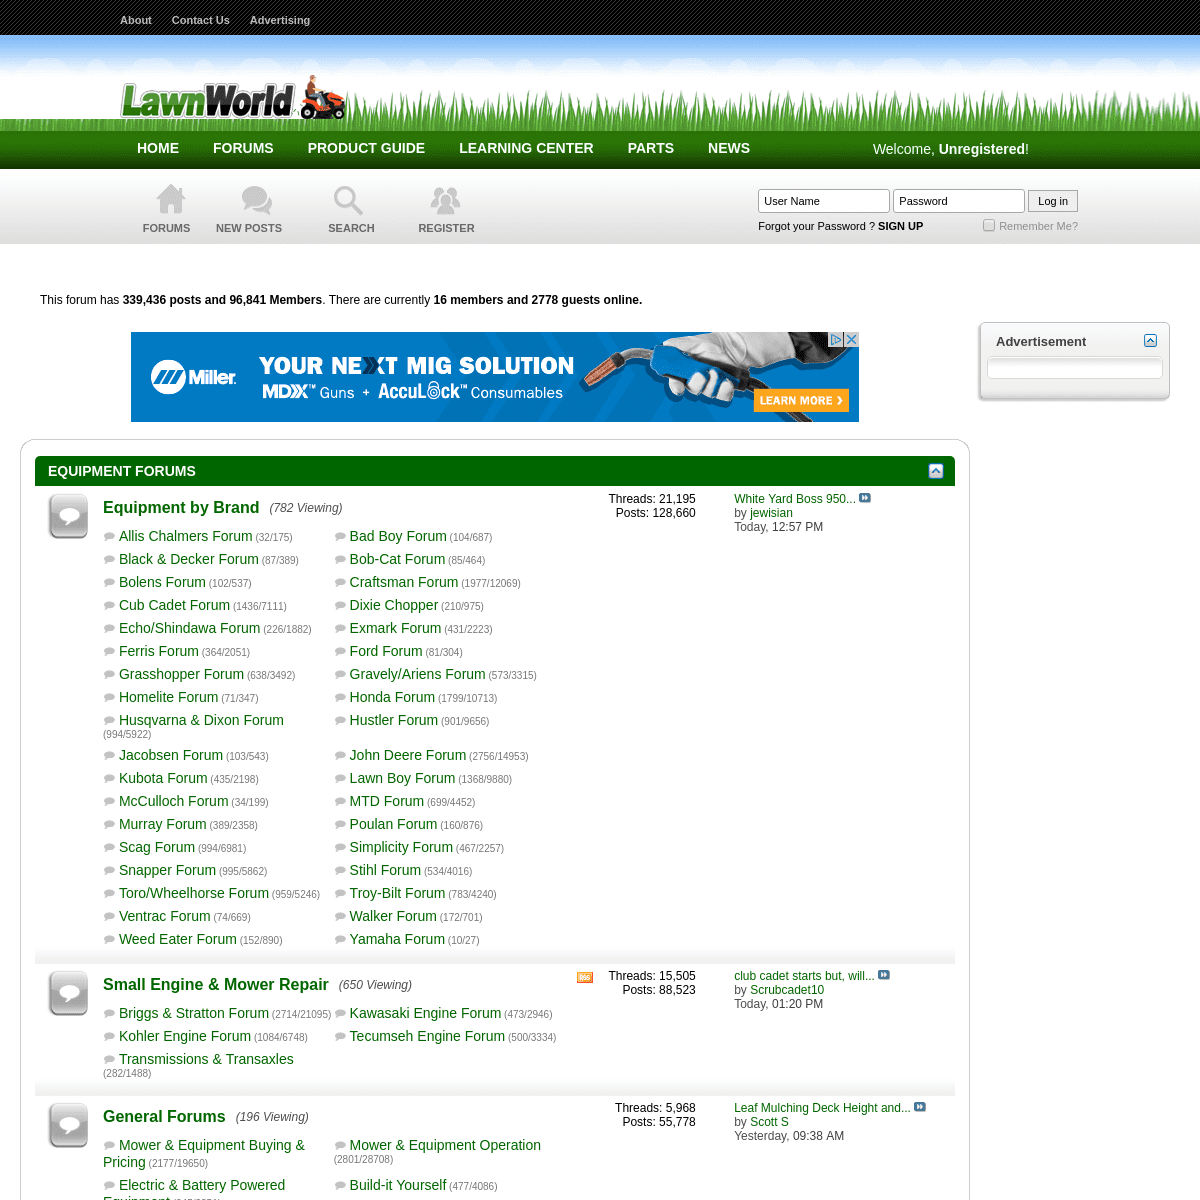 A complete backup of lawnmowerforum.com